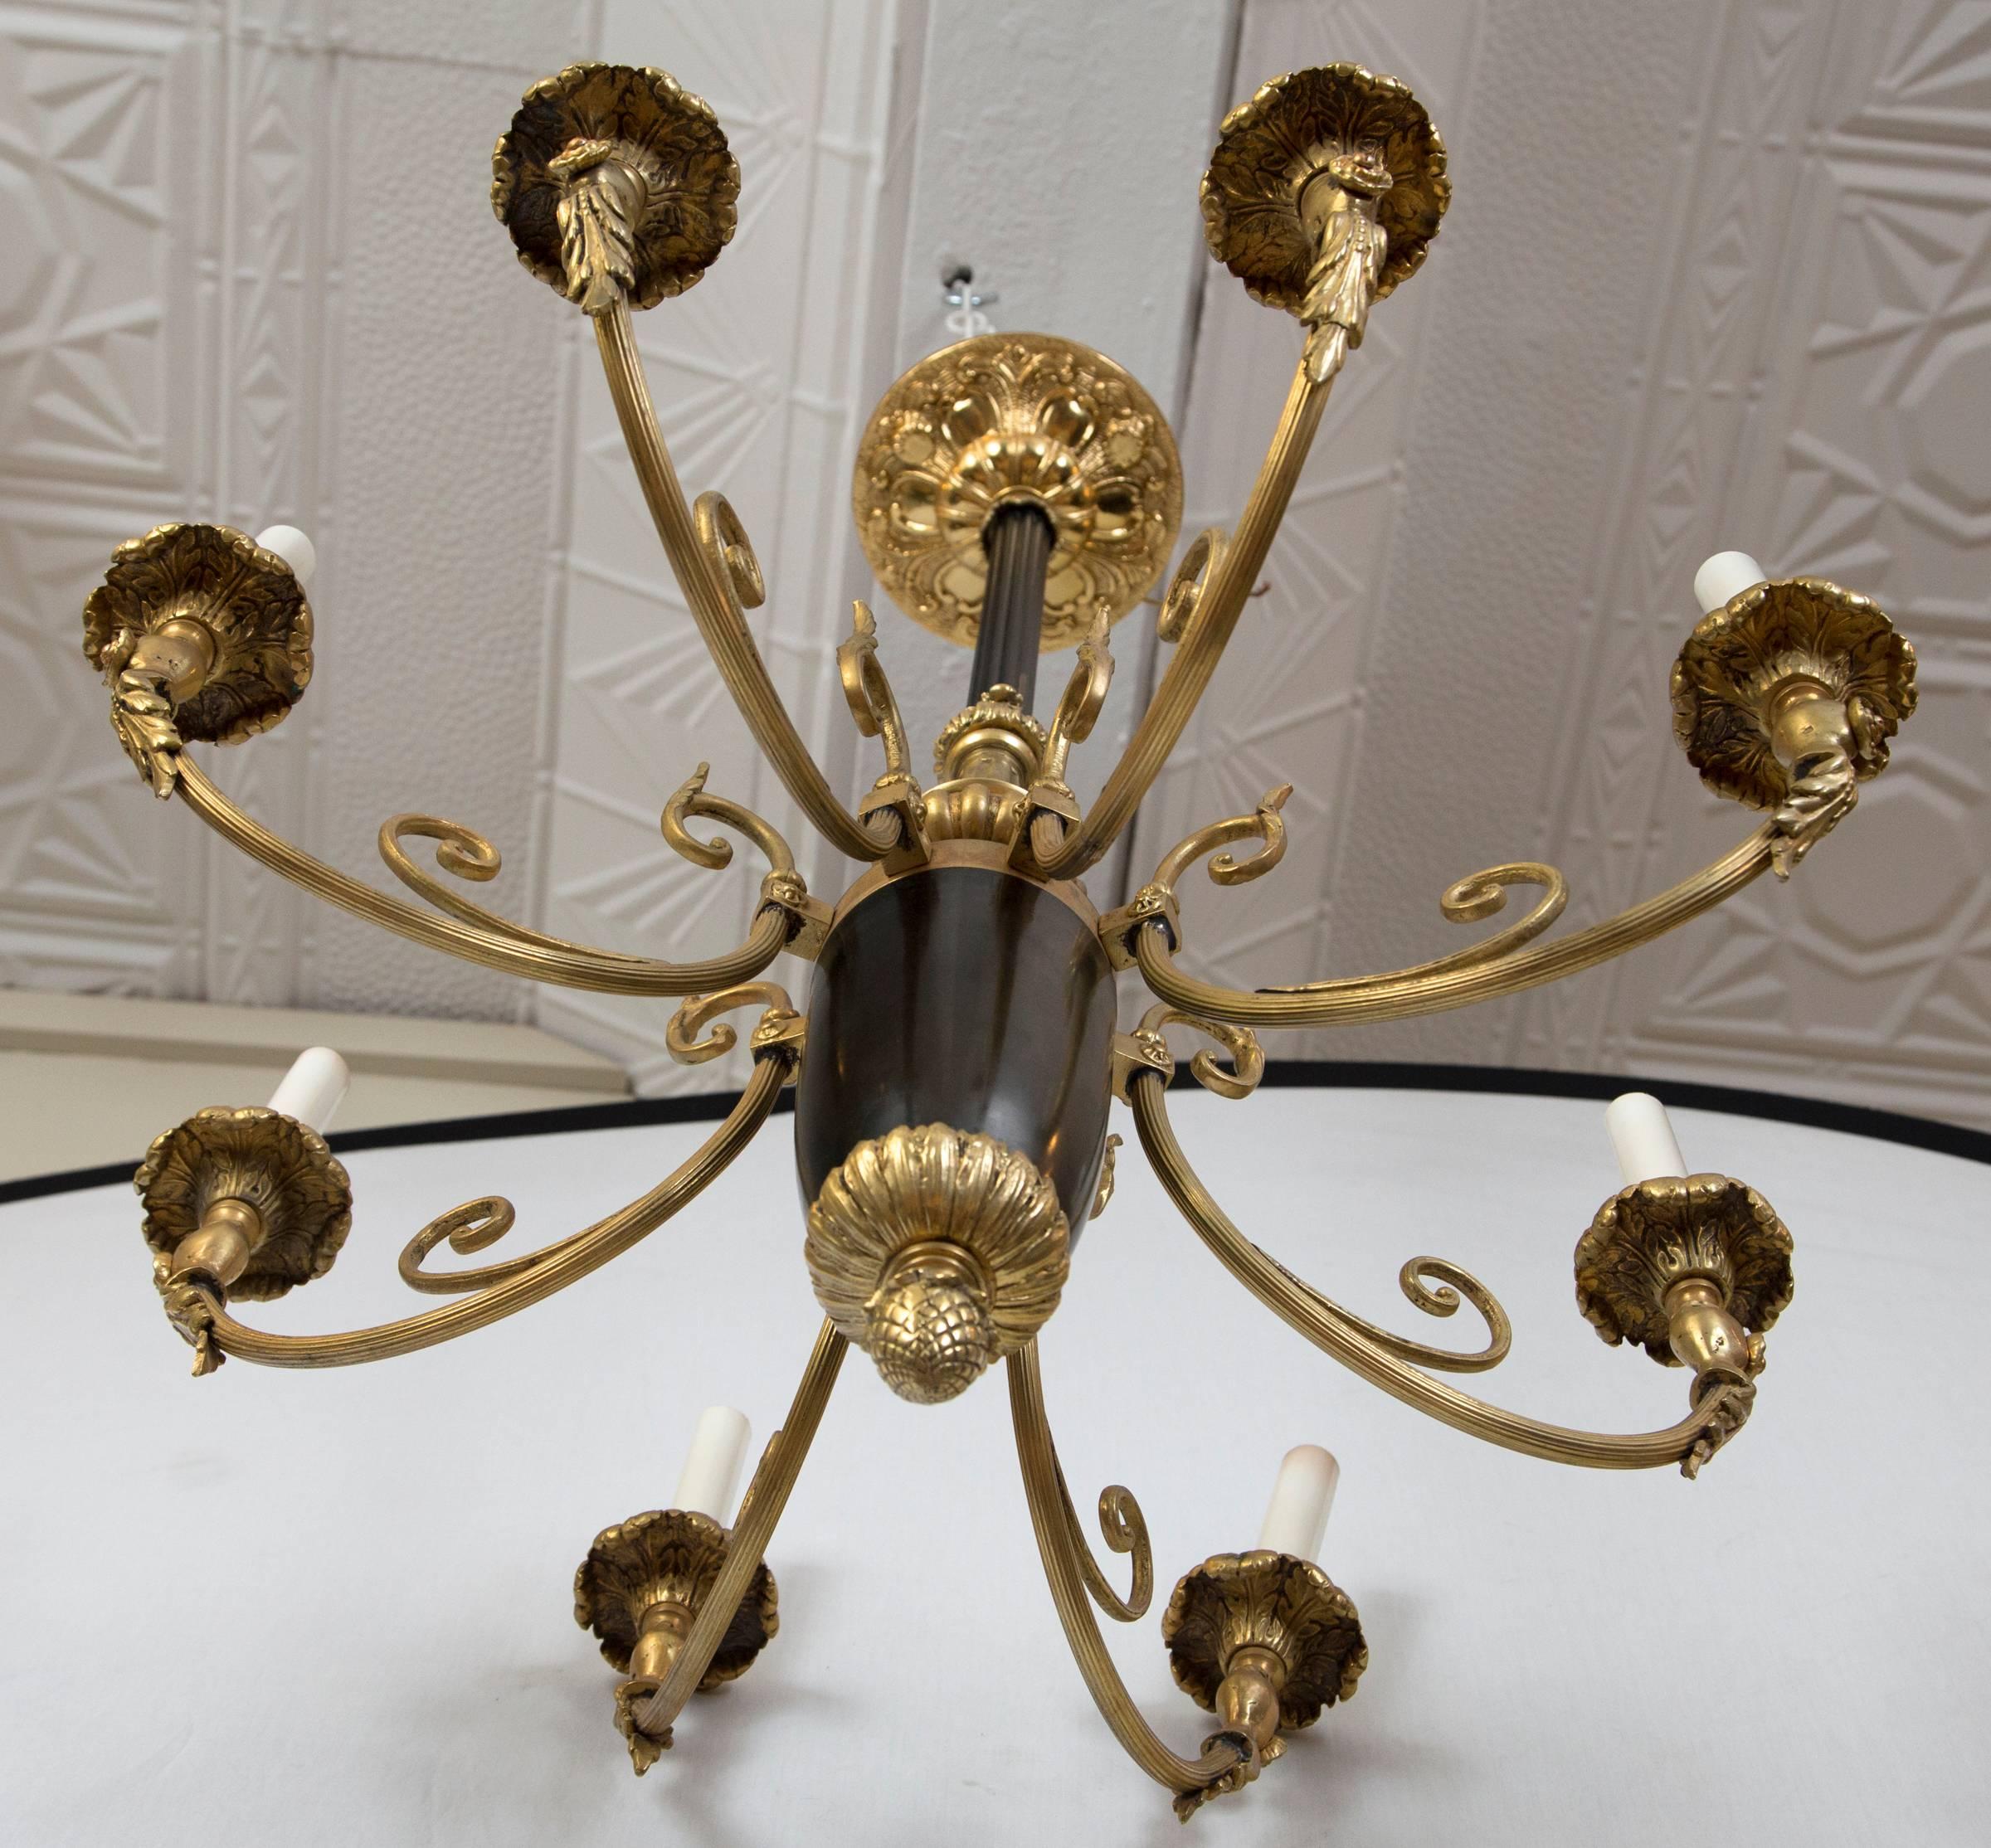 Gilt bronze and black tole eight-light chandelier. Eight long upturned arms with foliate decoration. The tole centre terminates in a large acorn finial. A ceiling canopy is included.